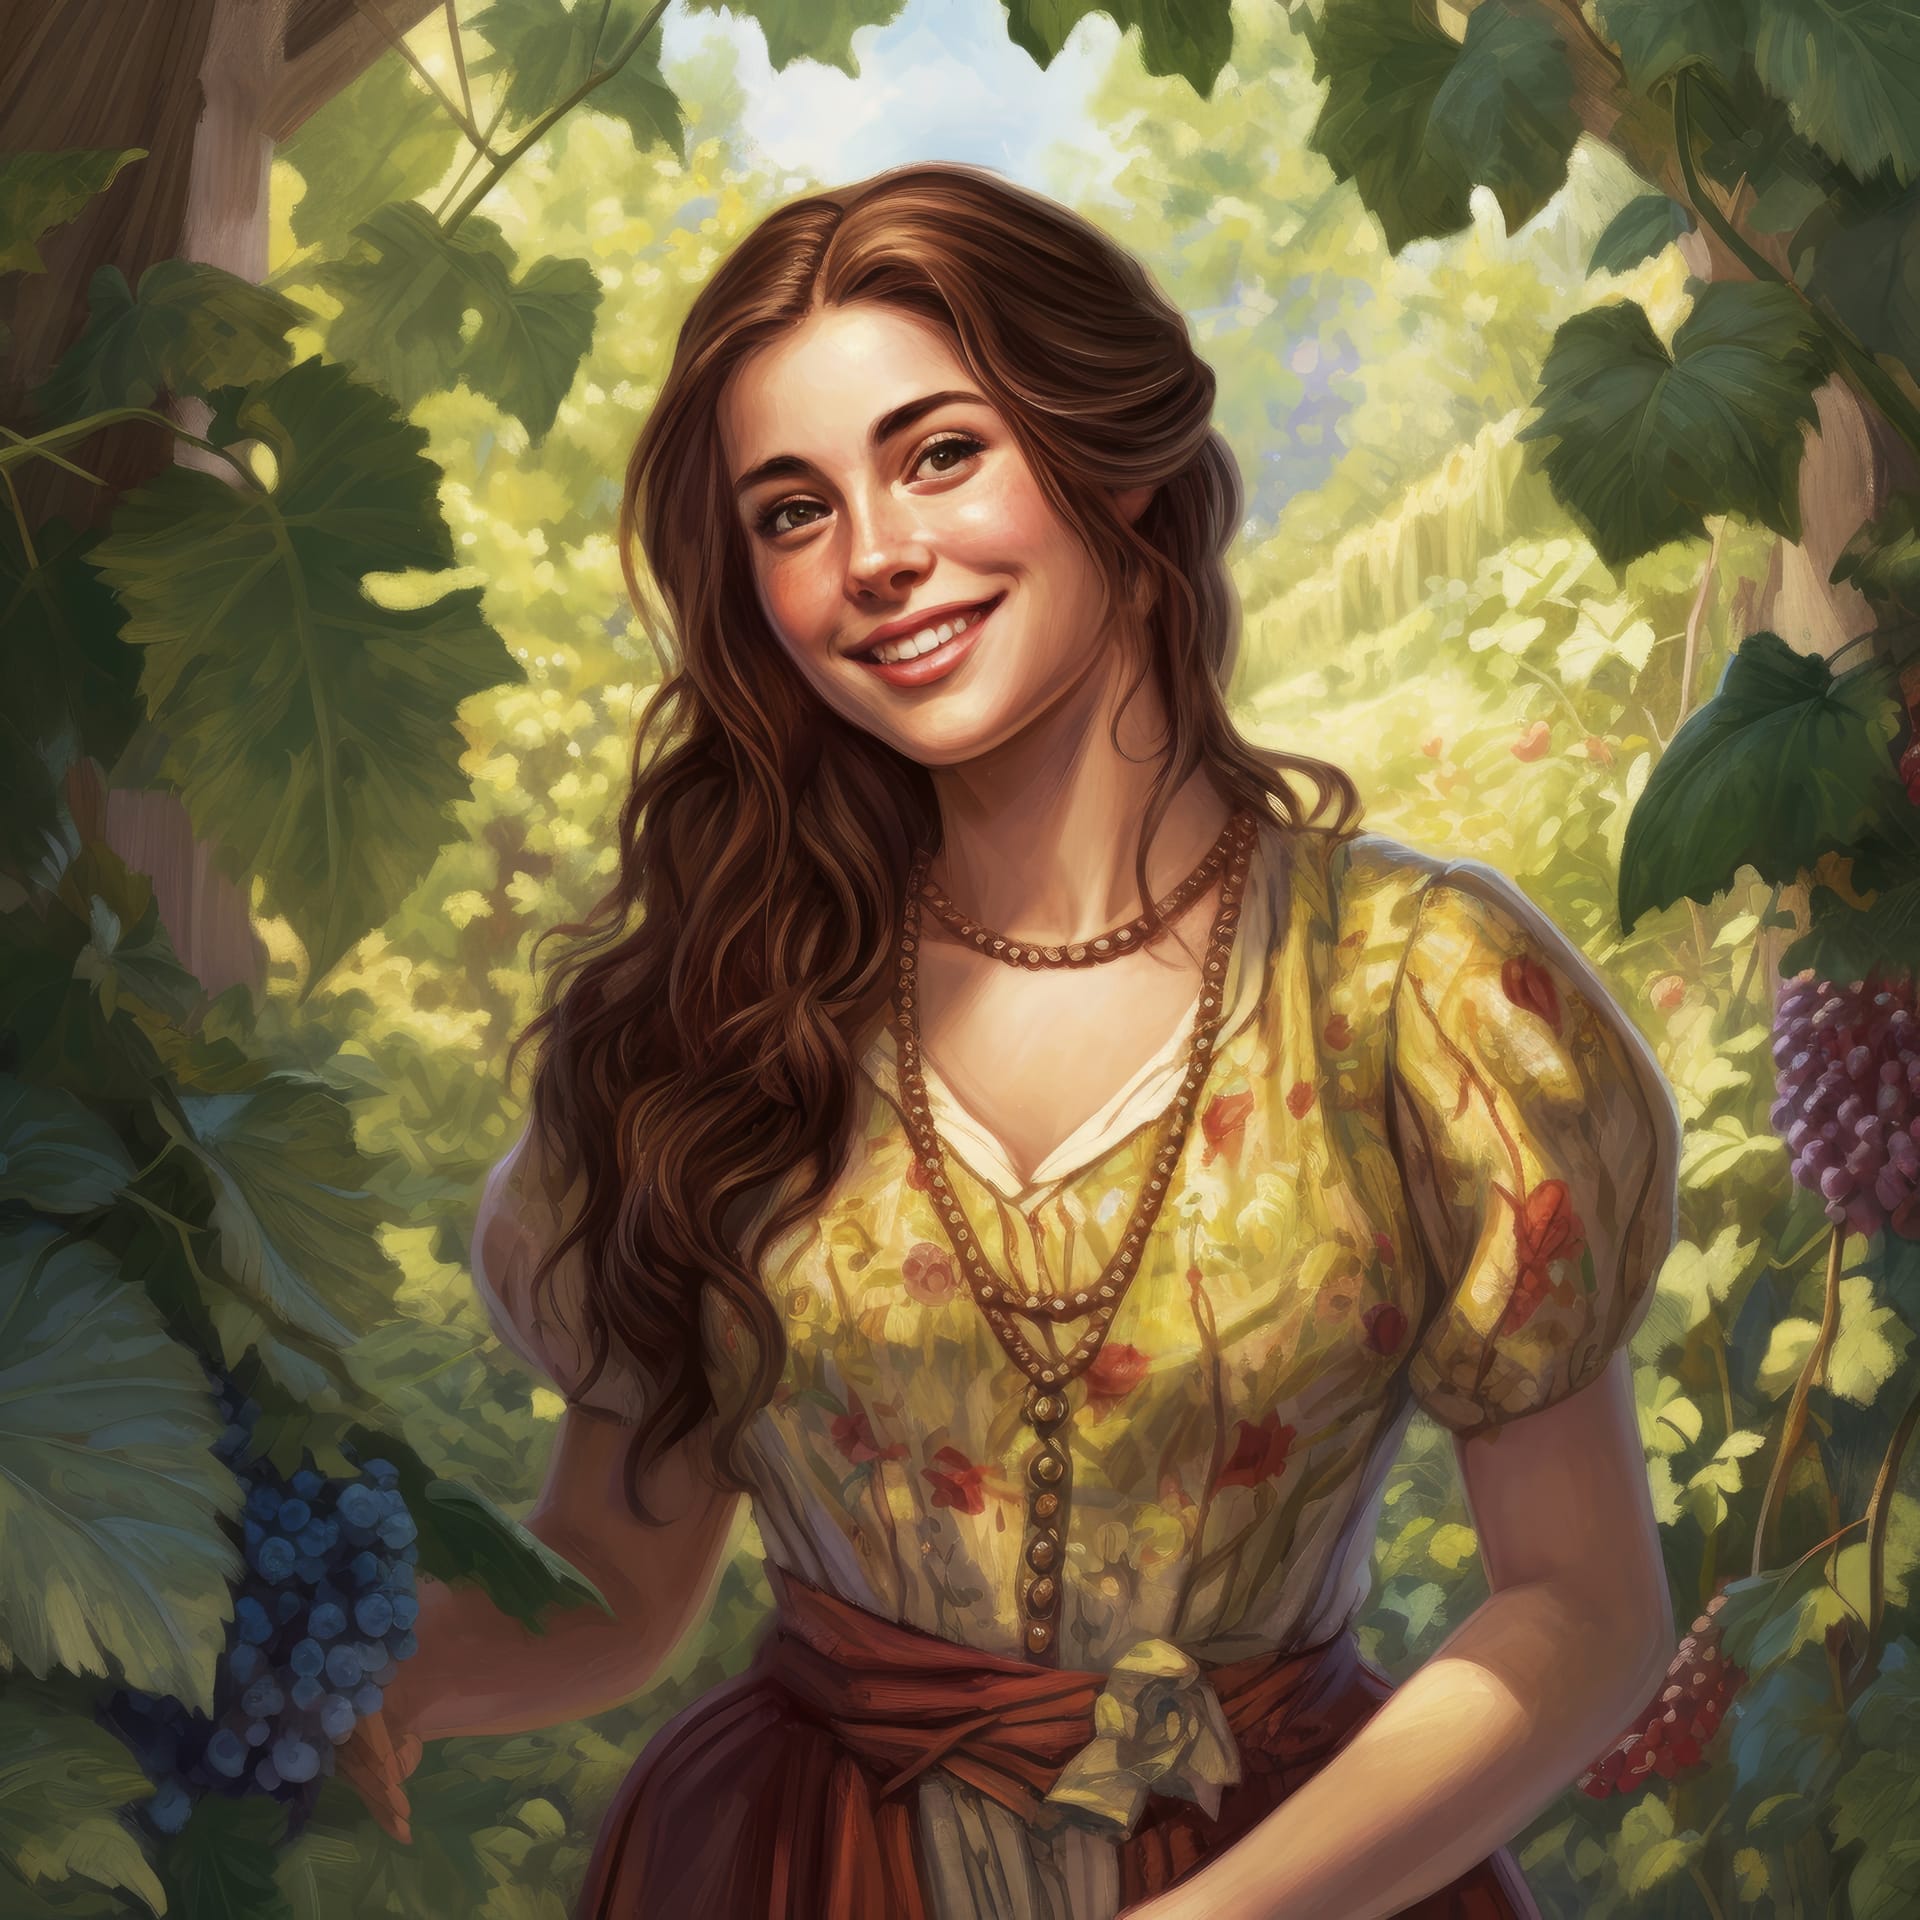 Woman yellow dress stands vineyard with grapes